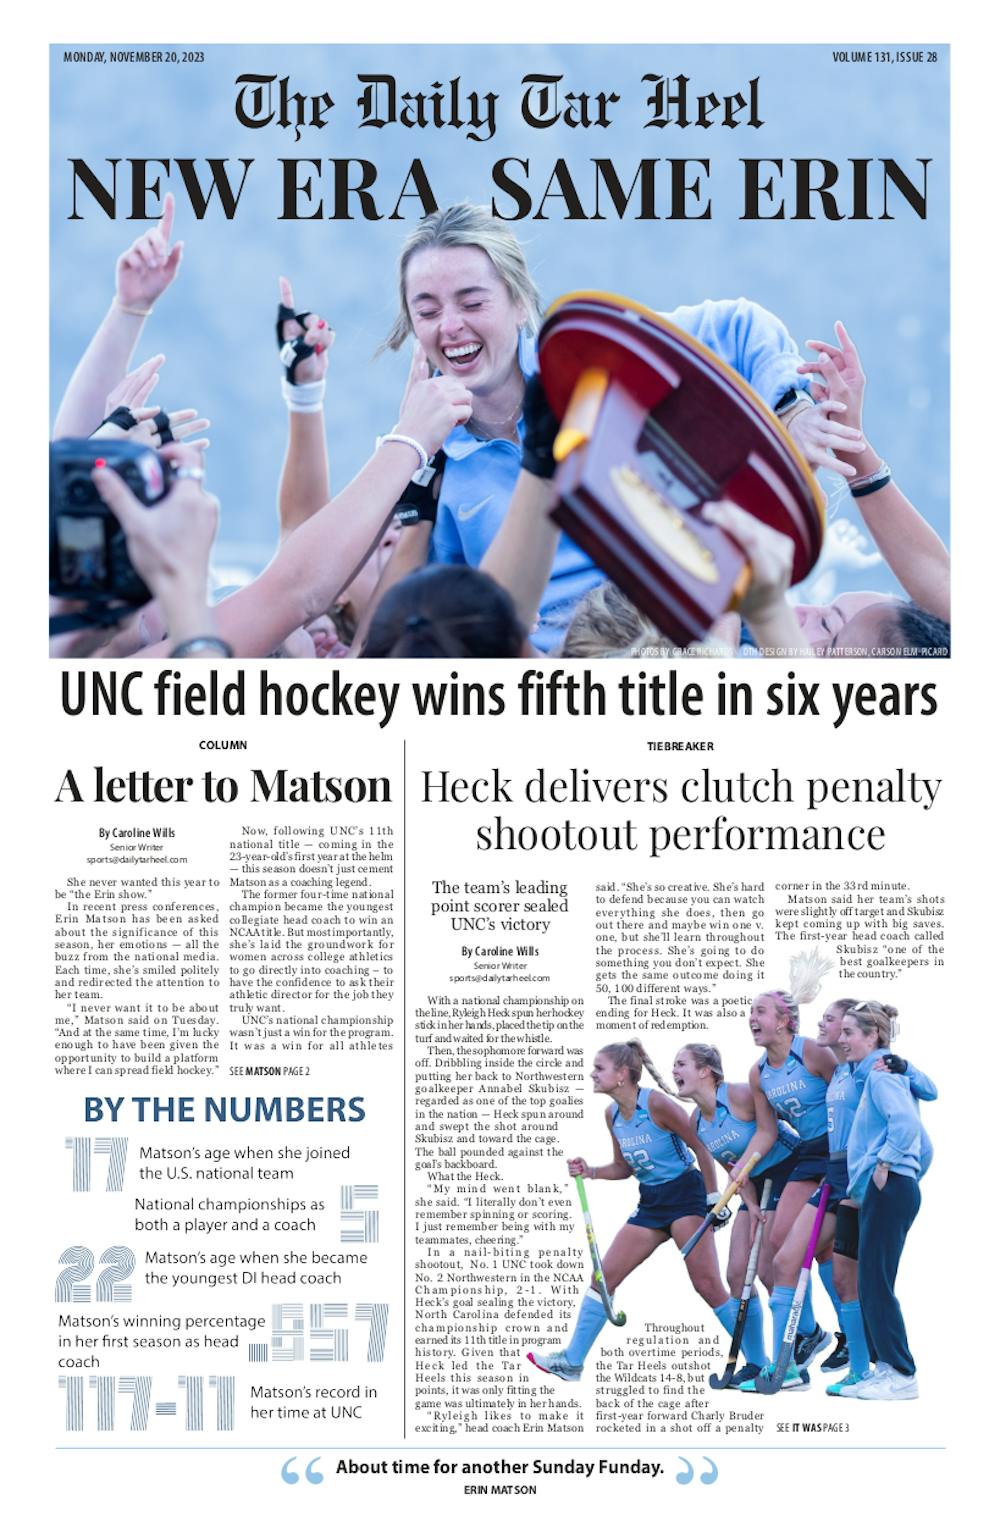 The Daily Tar Heel Victory Paper for November 20, 2023